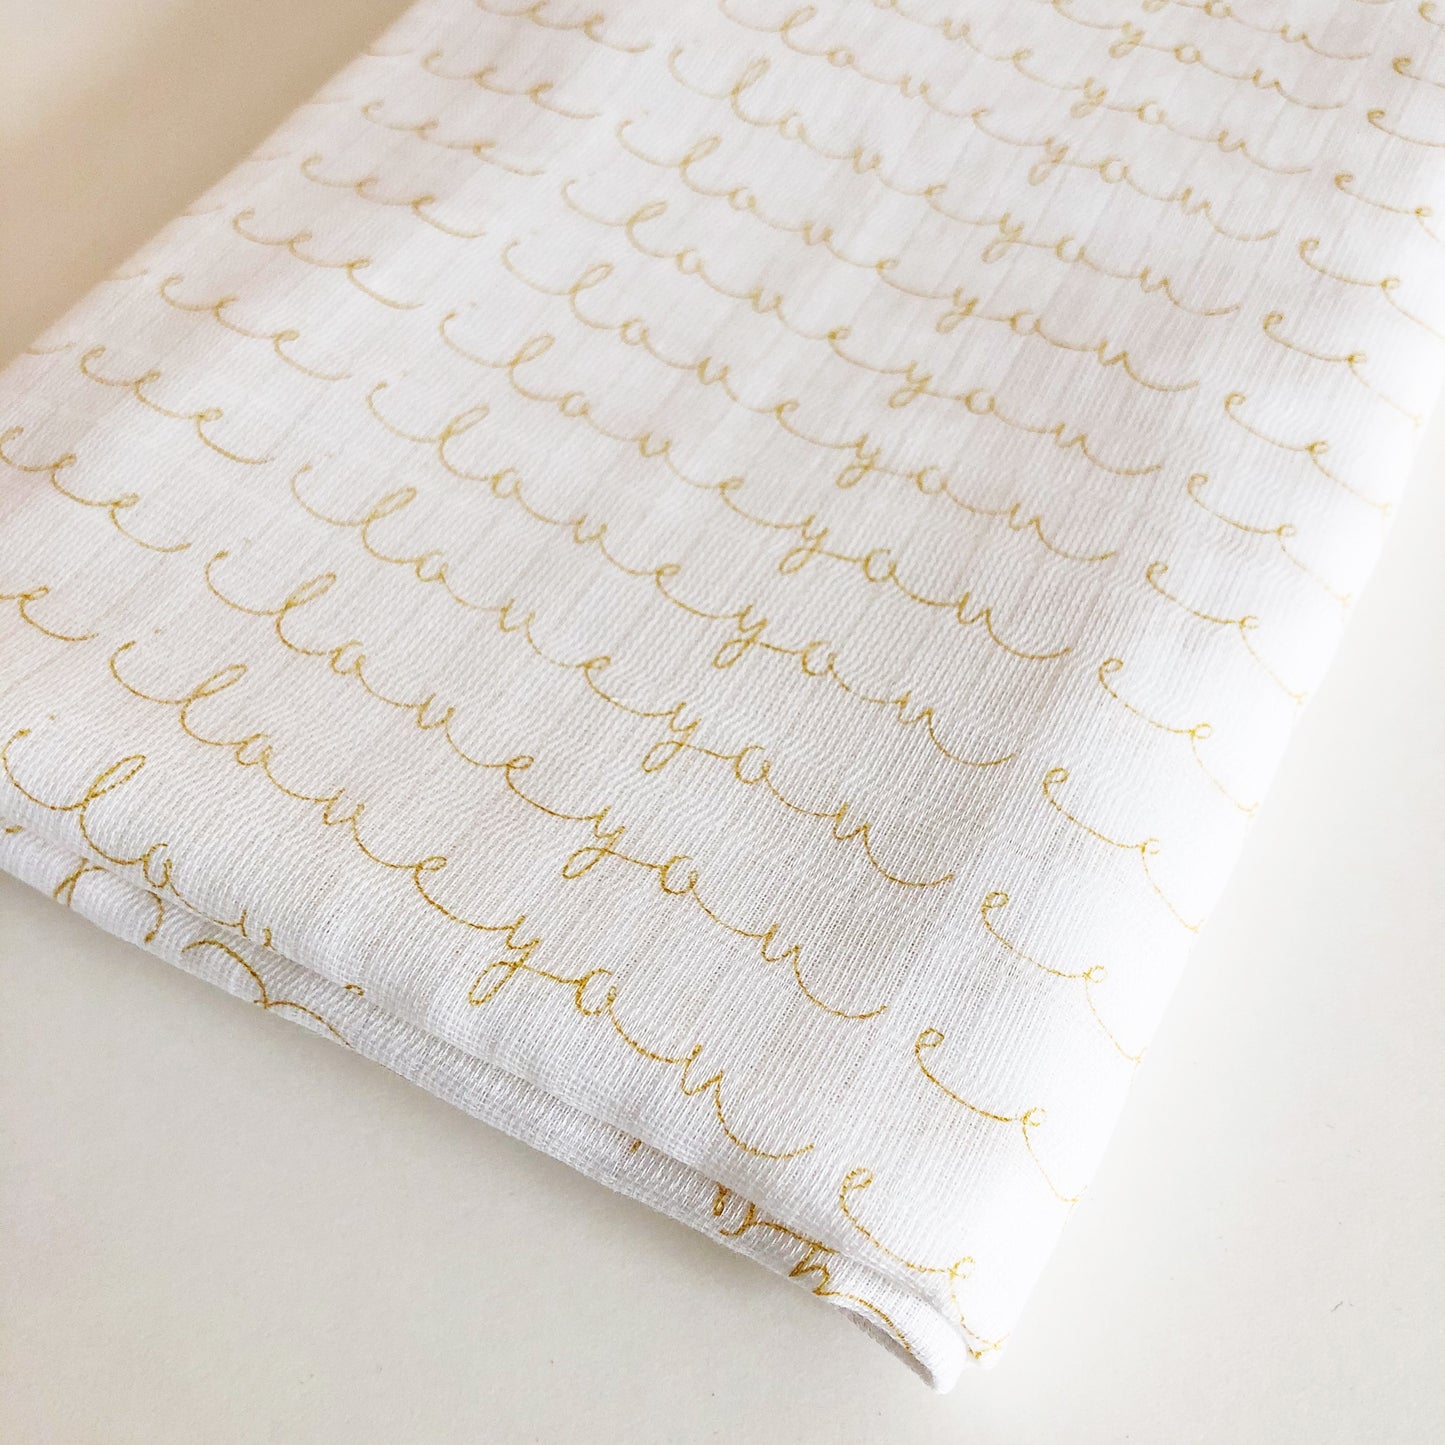 FABRIC (Double Gauze): 1 Yard I LOVE YOU in Gold on White